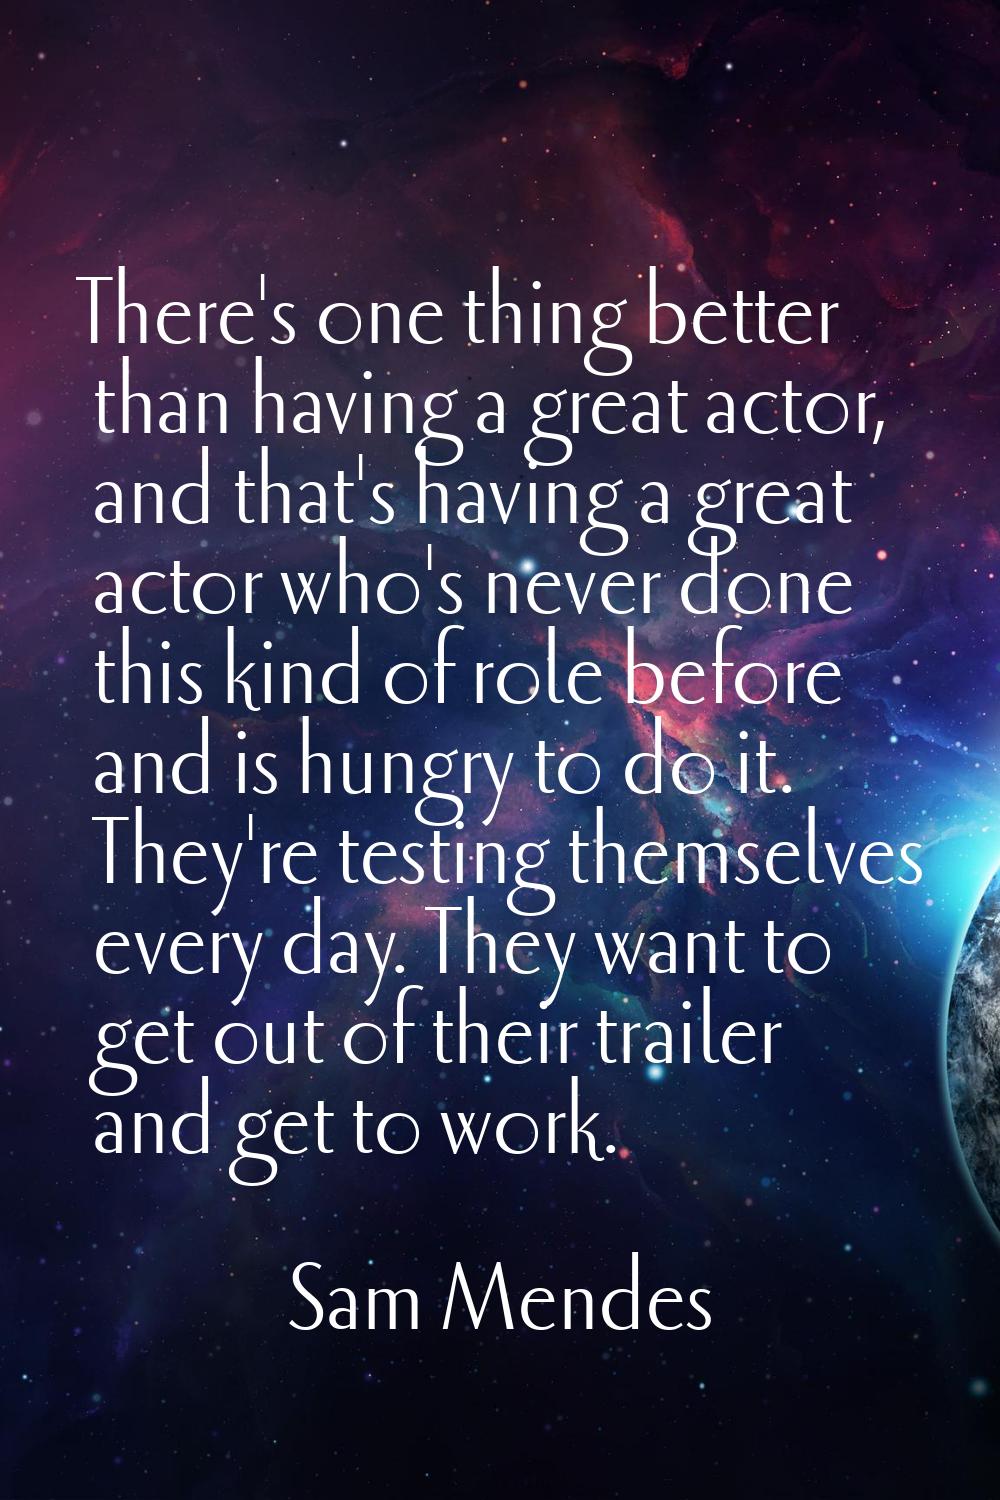 There's one thing better than having a great actor, and that's having a great actor who's never don